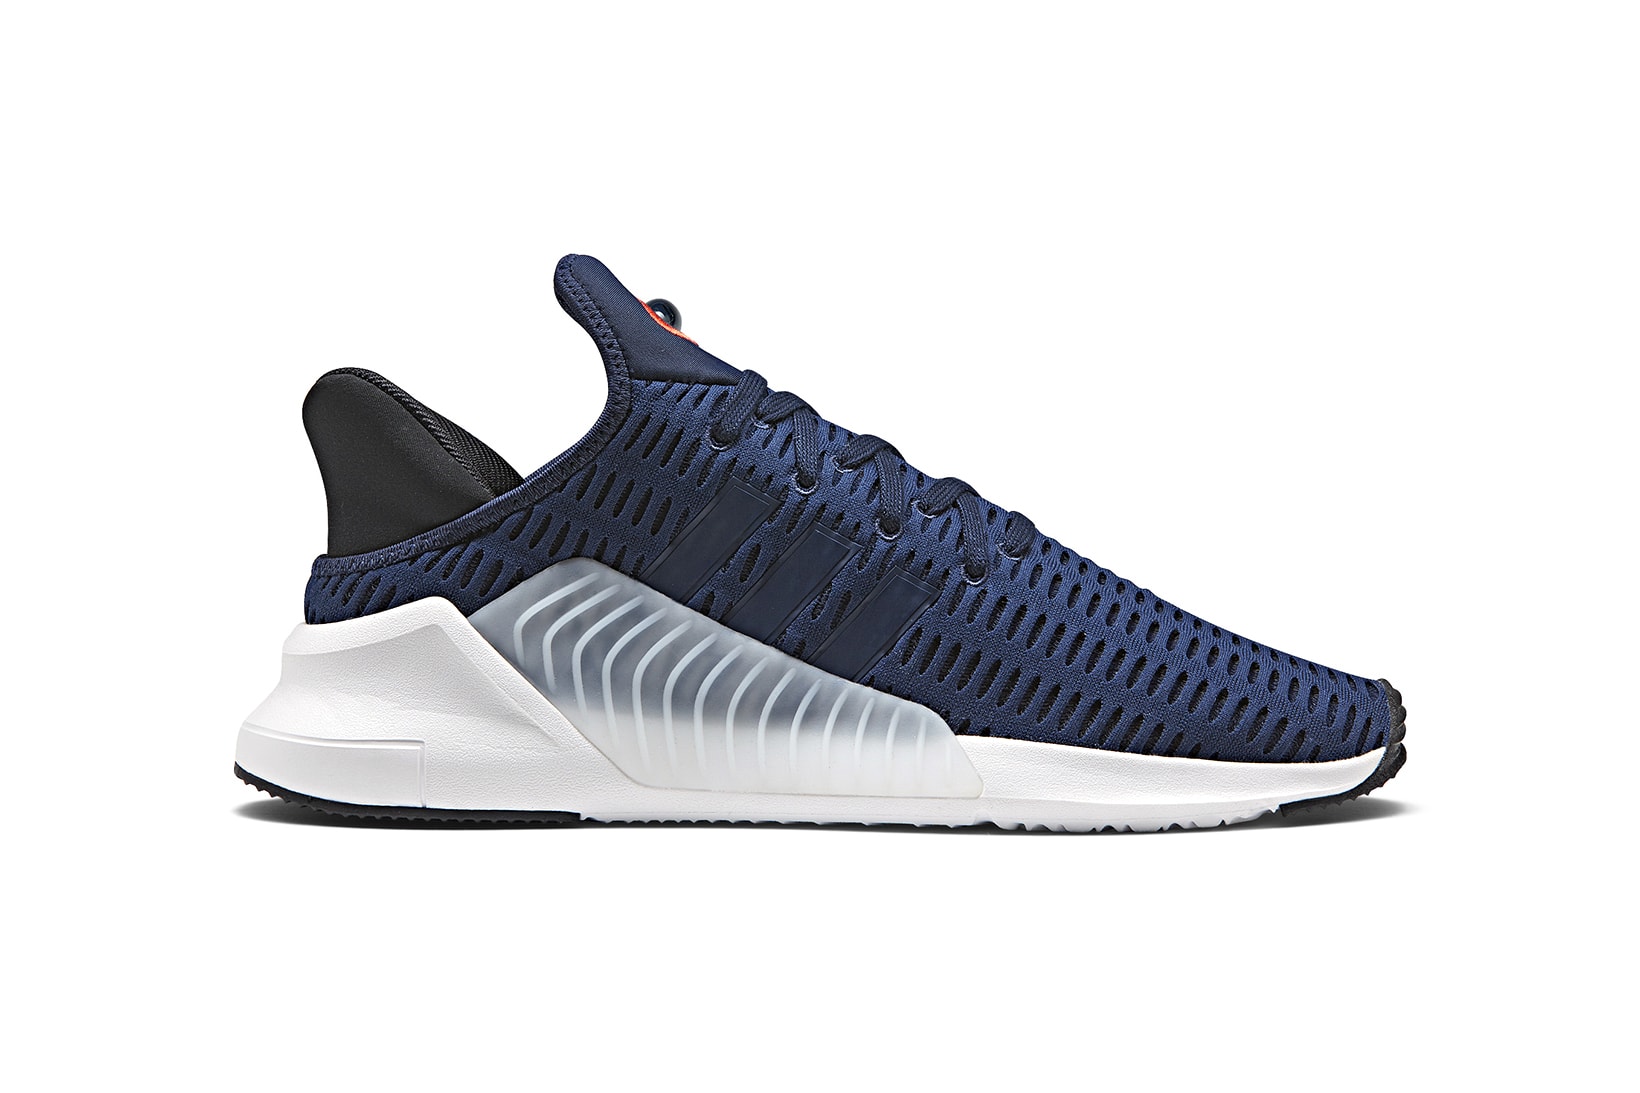 adidas ClimaCool 02 17 Ruby Blue Colorways Sneakers Shoes Footwear 2017 August 10 Release Date Info